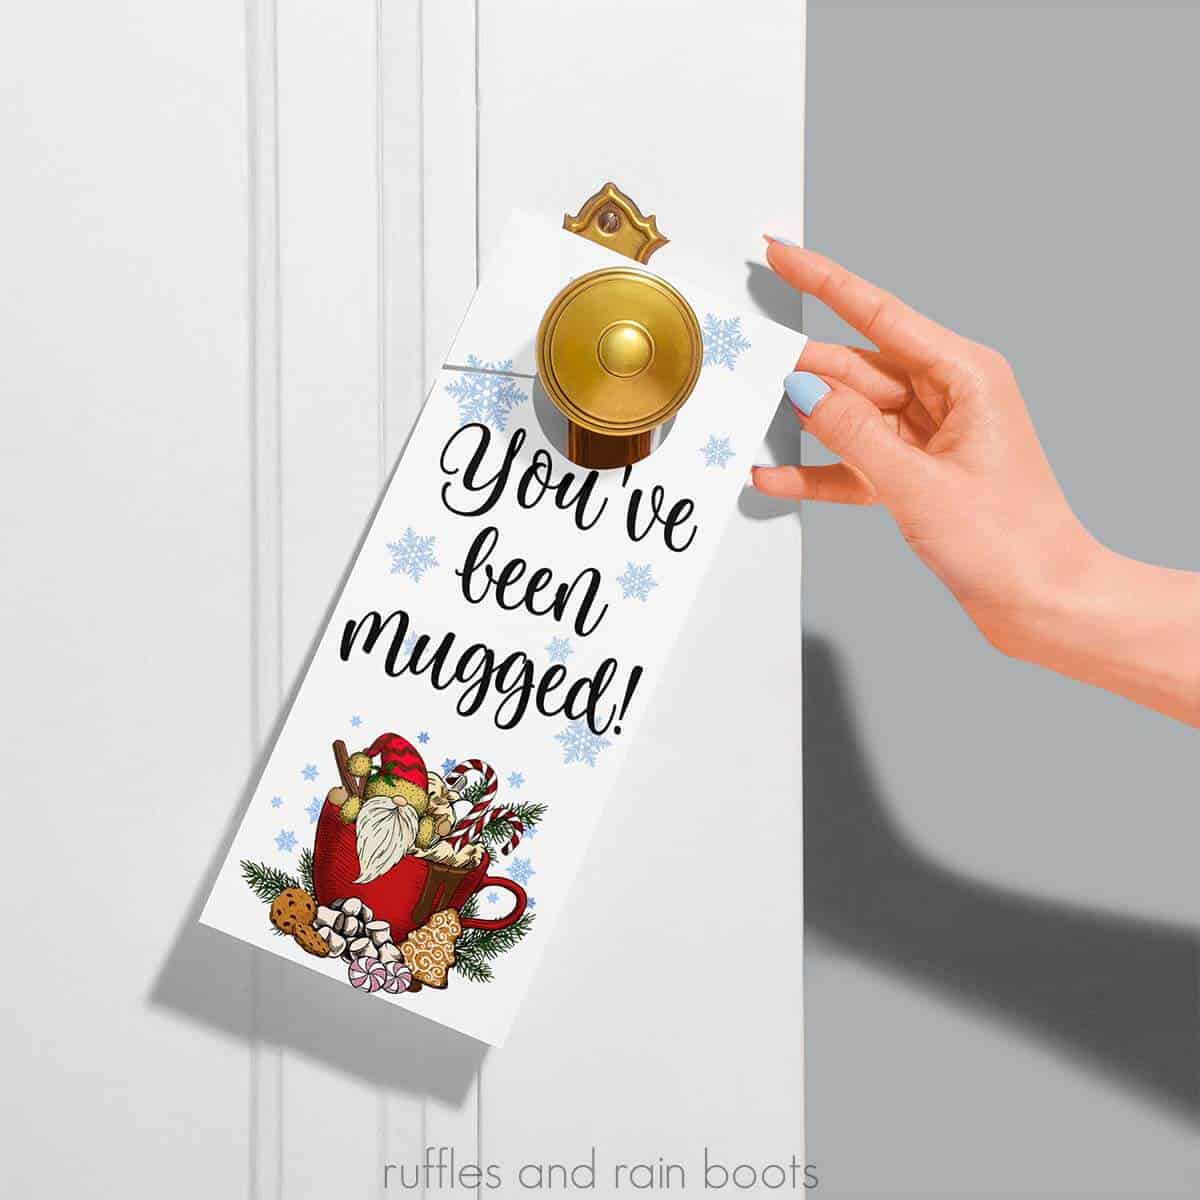 Square close up image of a You've been mugged door tag with a gnome and snowflakes on white door with gray wall and a hand.